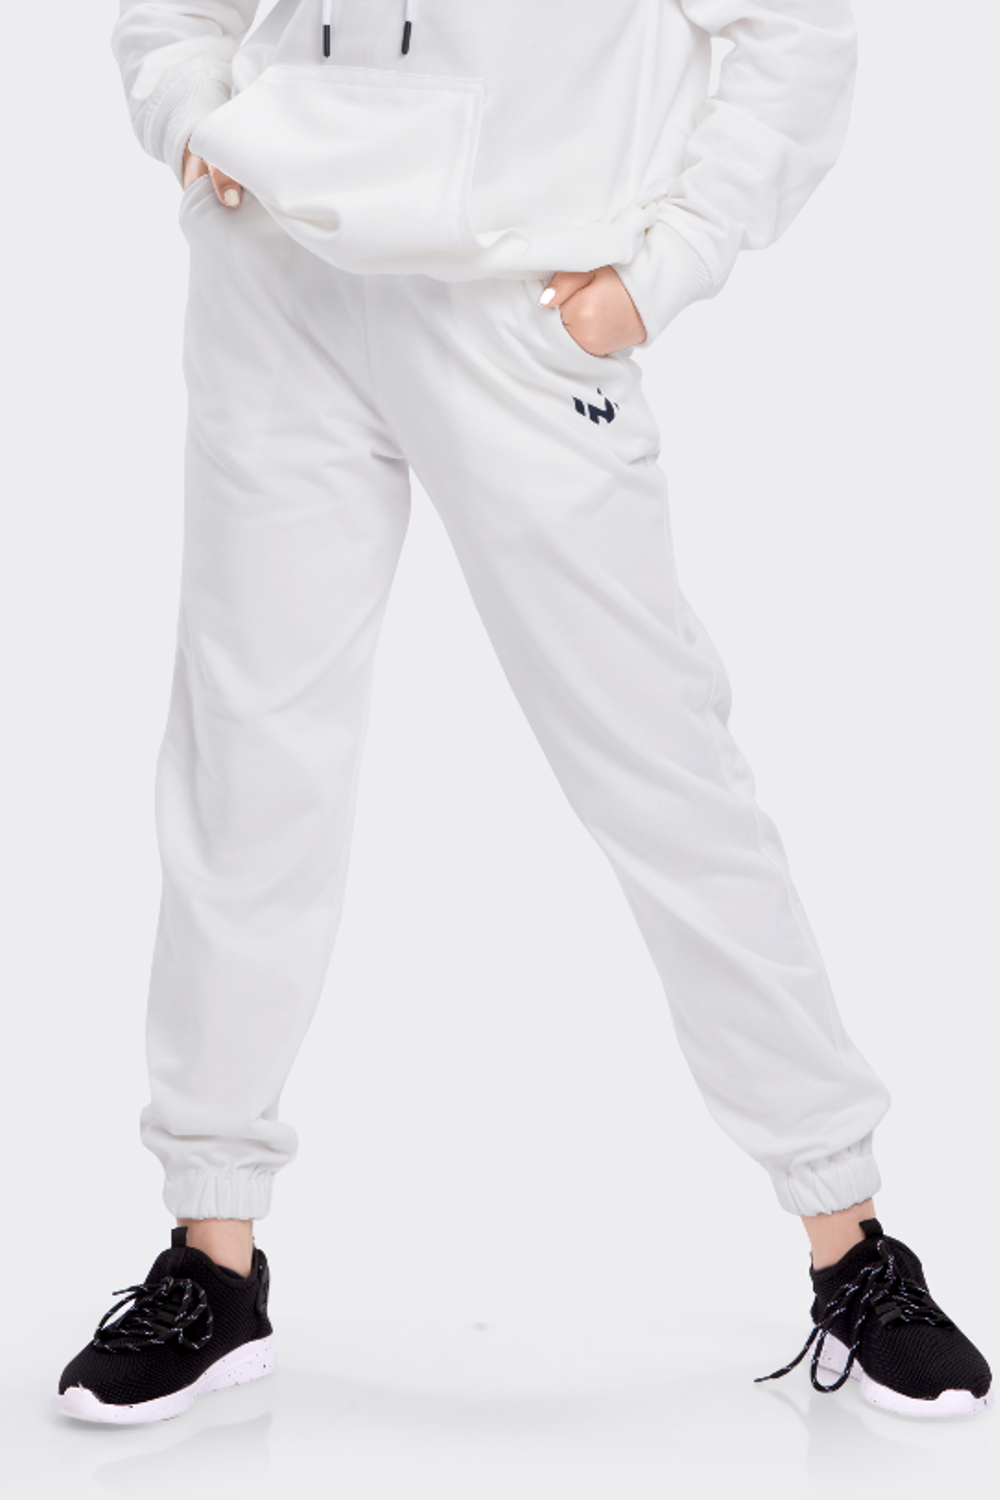 White Sports Track Pants - Buy White Sports Track Pants online in India